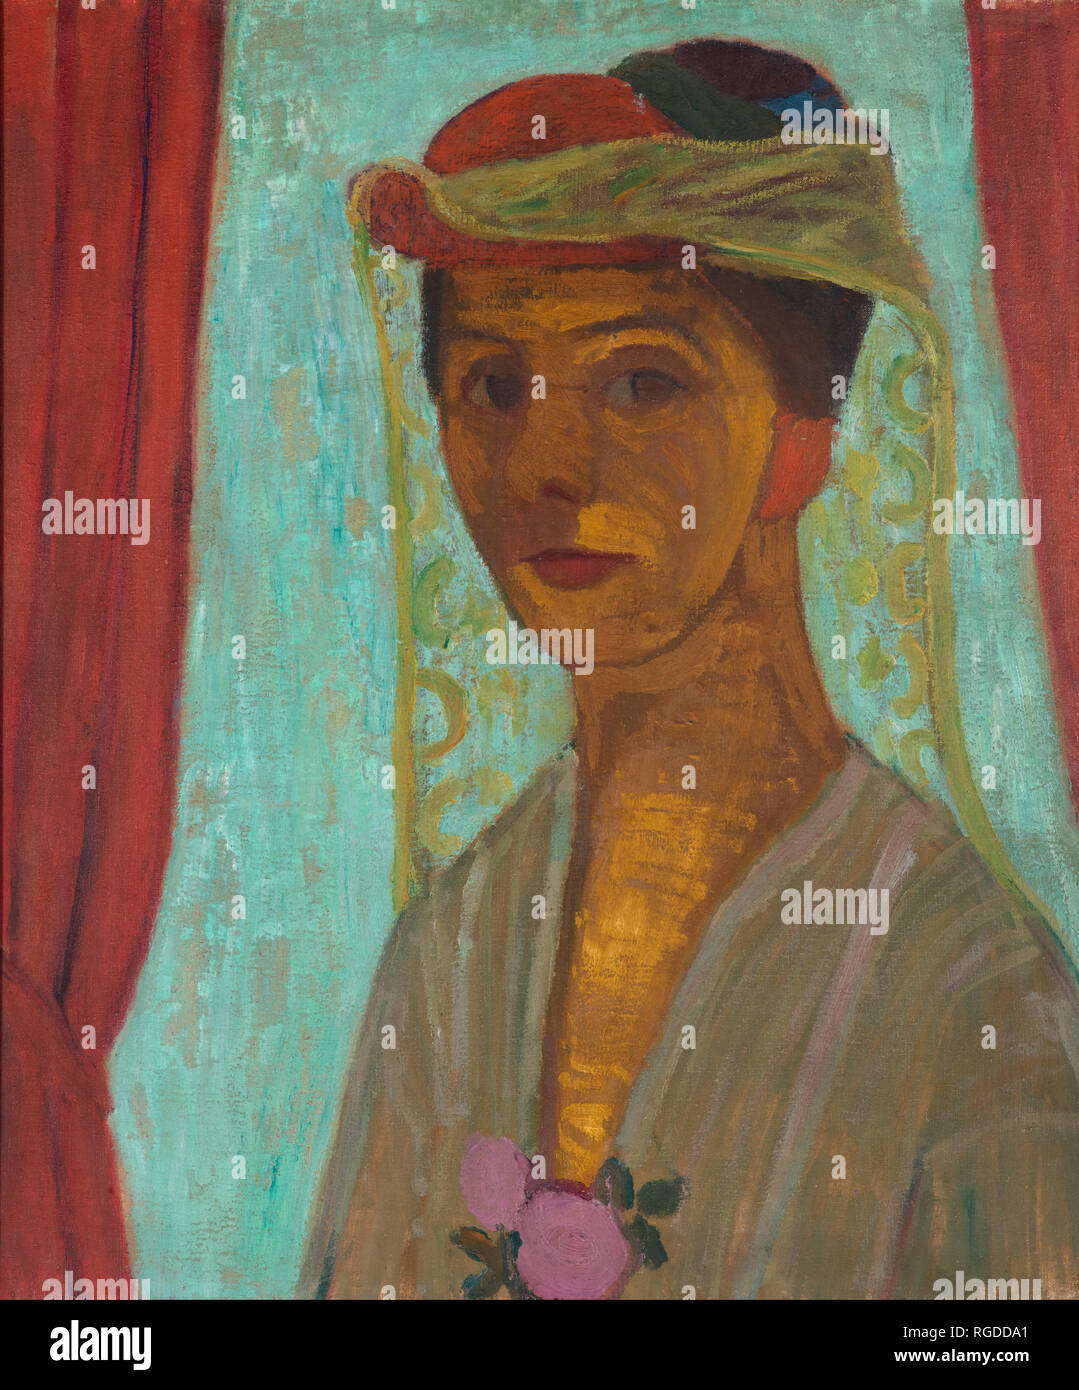 Selbstbildnis mit Hut und Schleier / Self-portrait with hat and veil. Date/Period: Ca. 1906-1907. Painting. Oil on canvas. Height: 89.6 cm (35.2 in); Width: 79.8 cm (31.4 in). Author: Paula Modersohn-Becker. MODERSOHN-BECKER, PAULA. Stock Photo